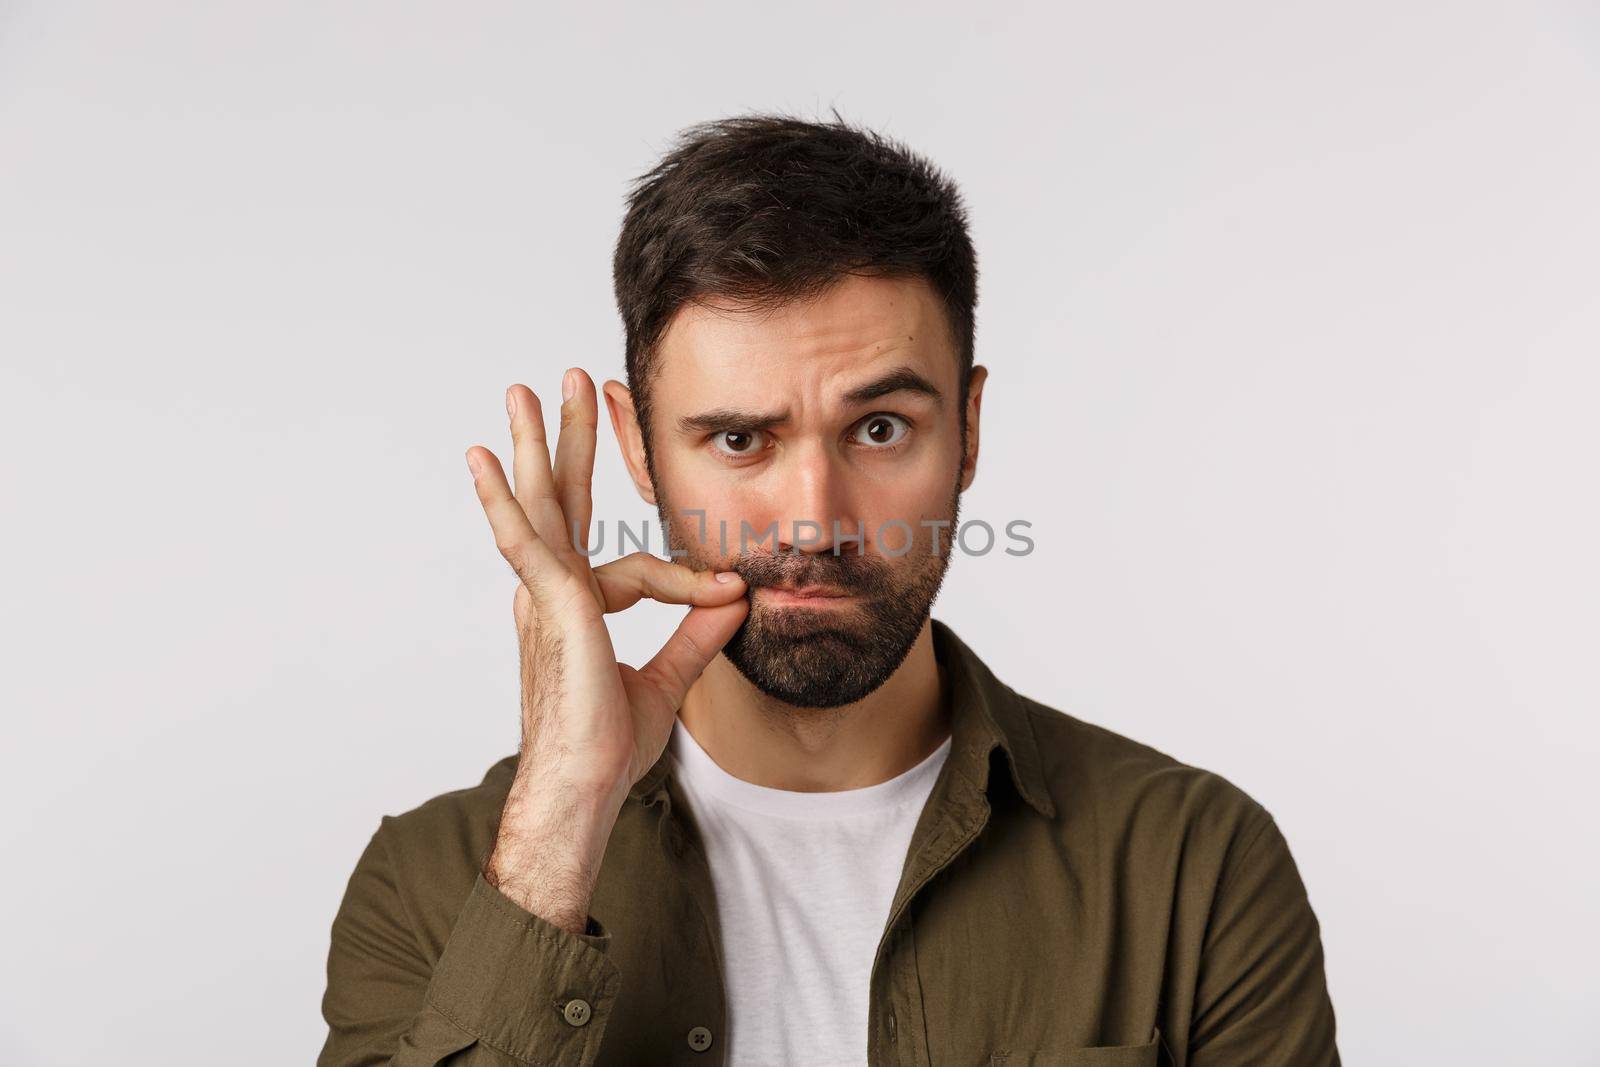 My lips are sealed with promise. Serious and funny bearded adult man keep mouth shut, making zip gesture and raise one eyebrow as hinting person stay silent, keep secret safe, white background.